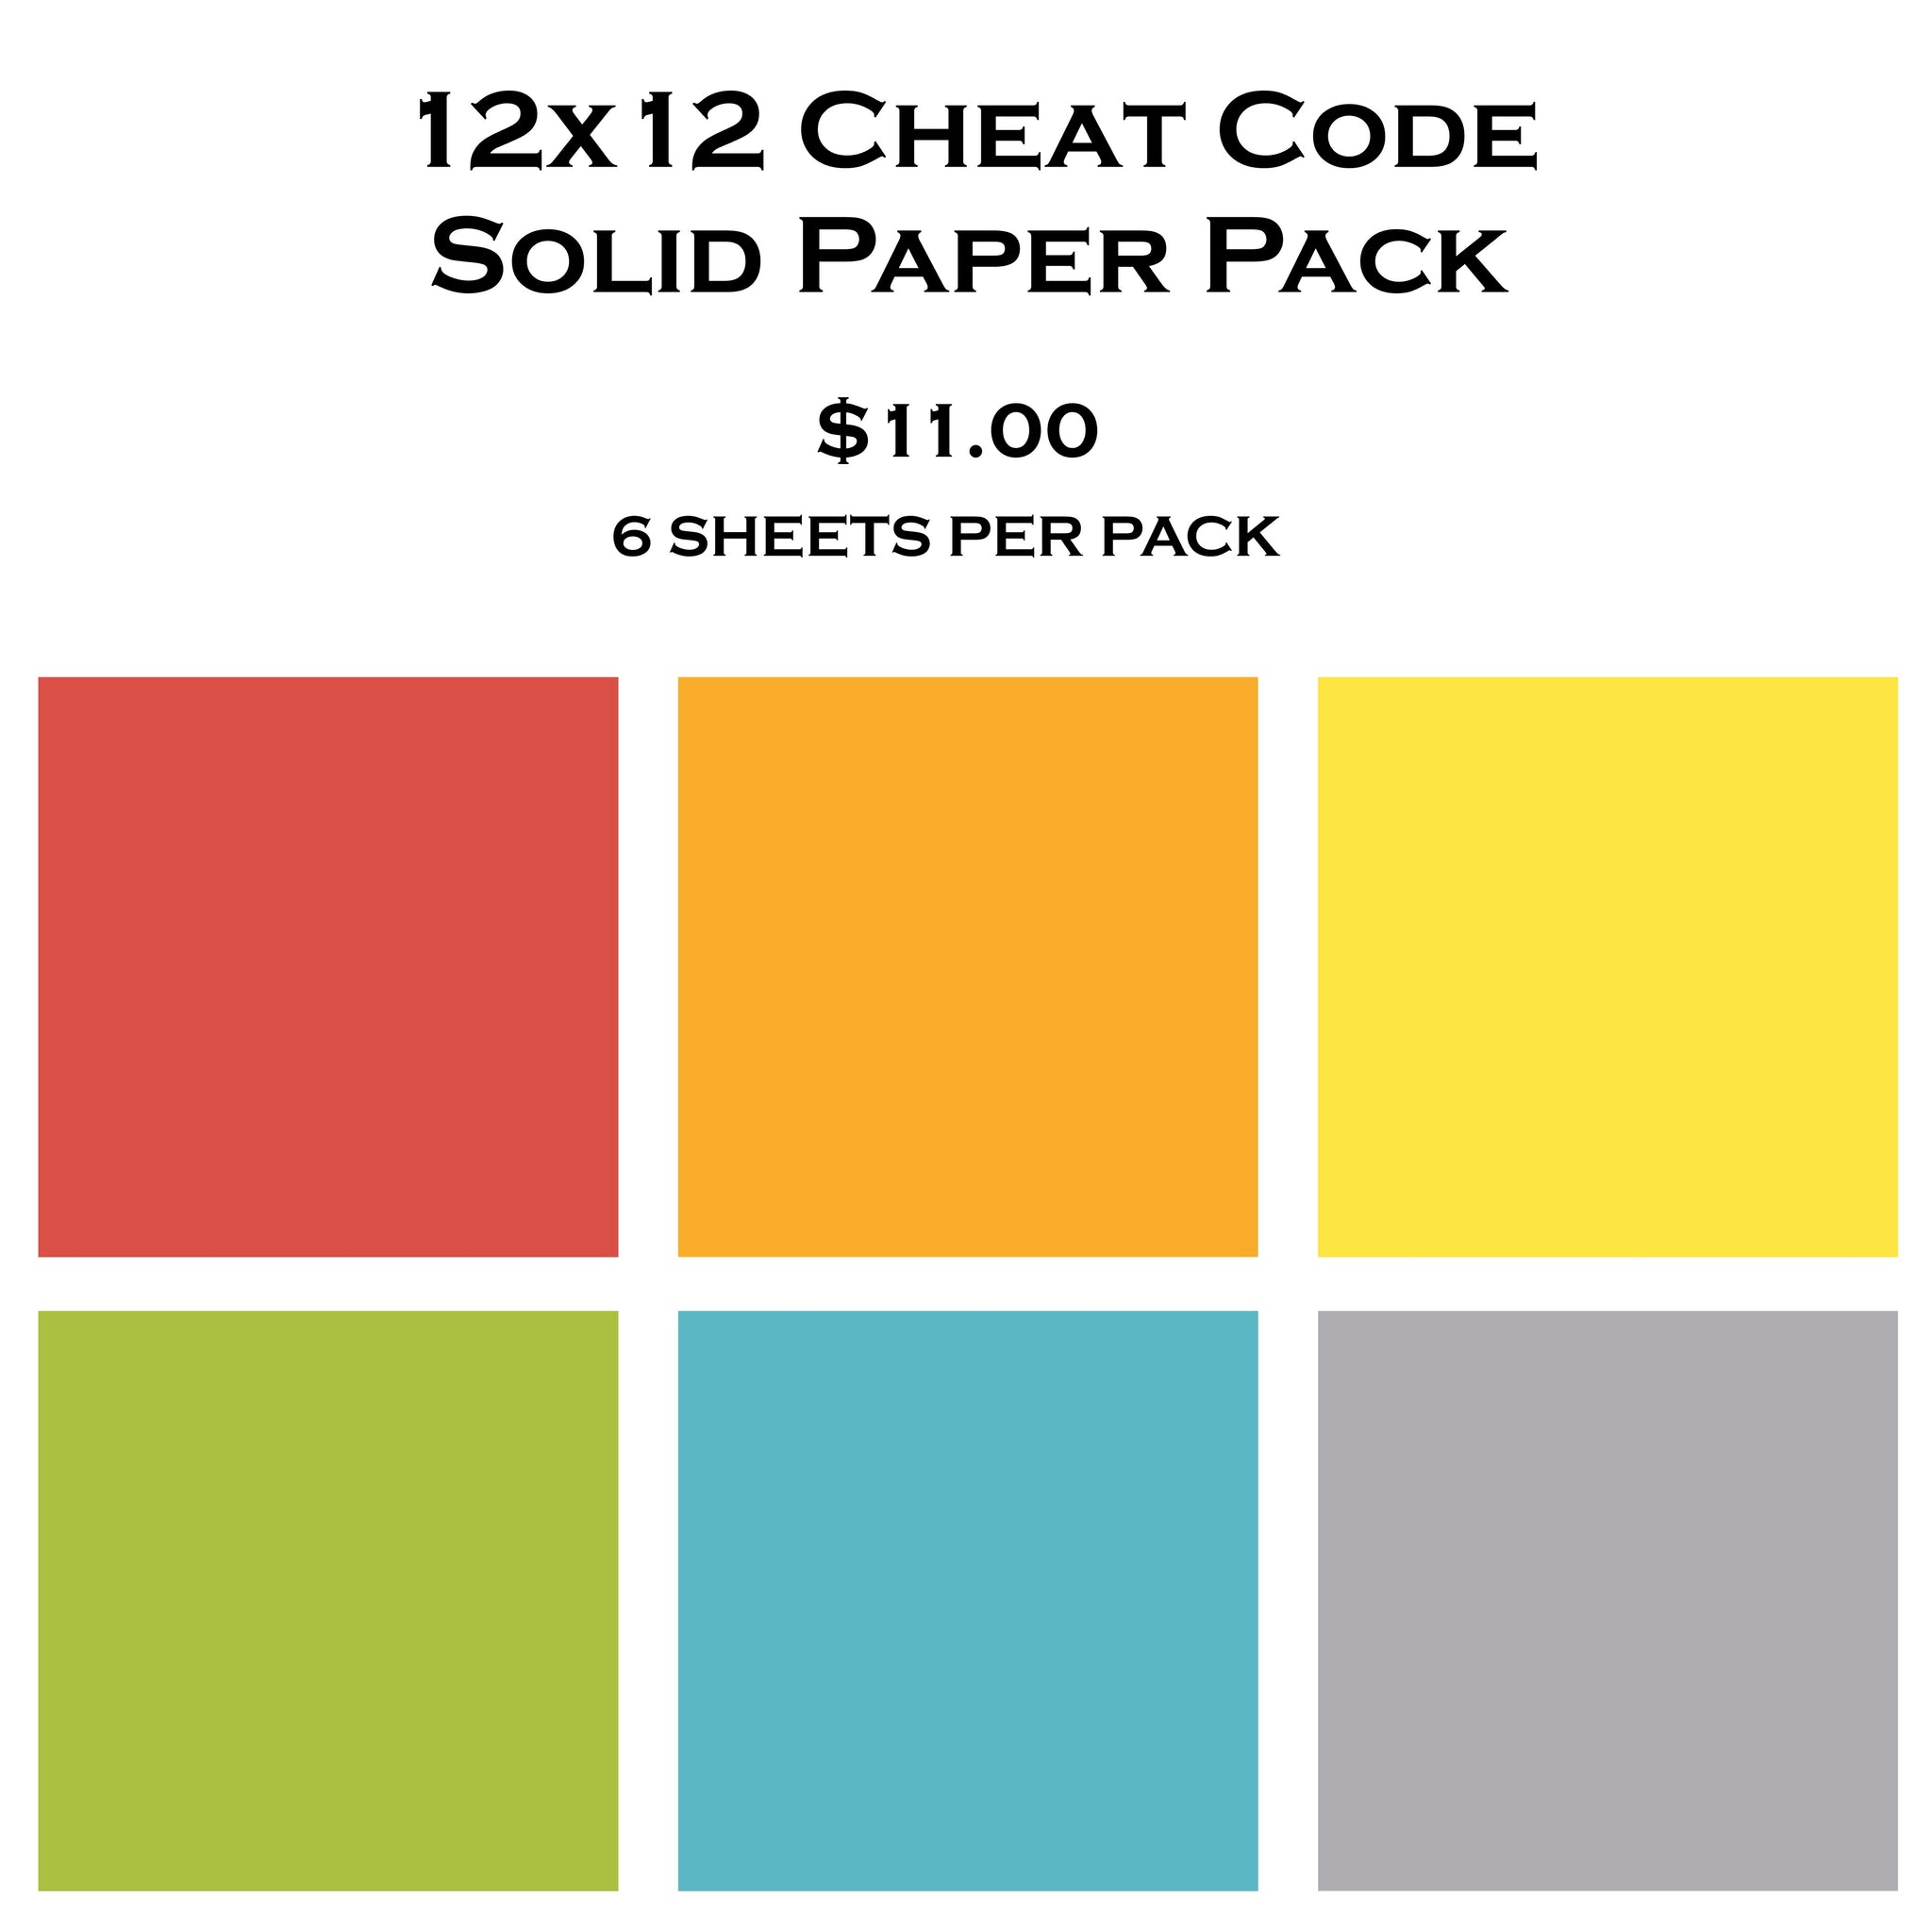 Cheat Code 12x12 Solid Paper Pack